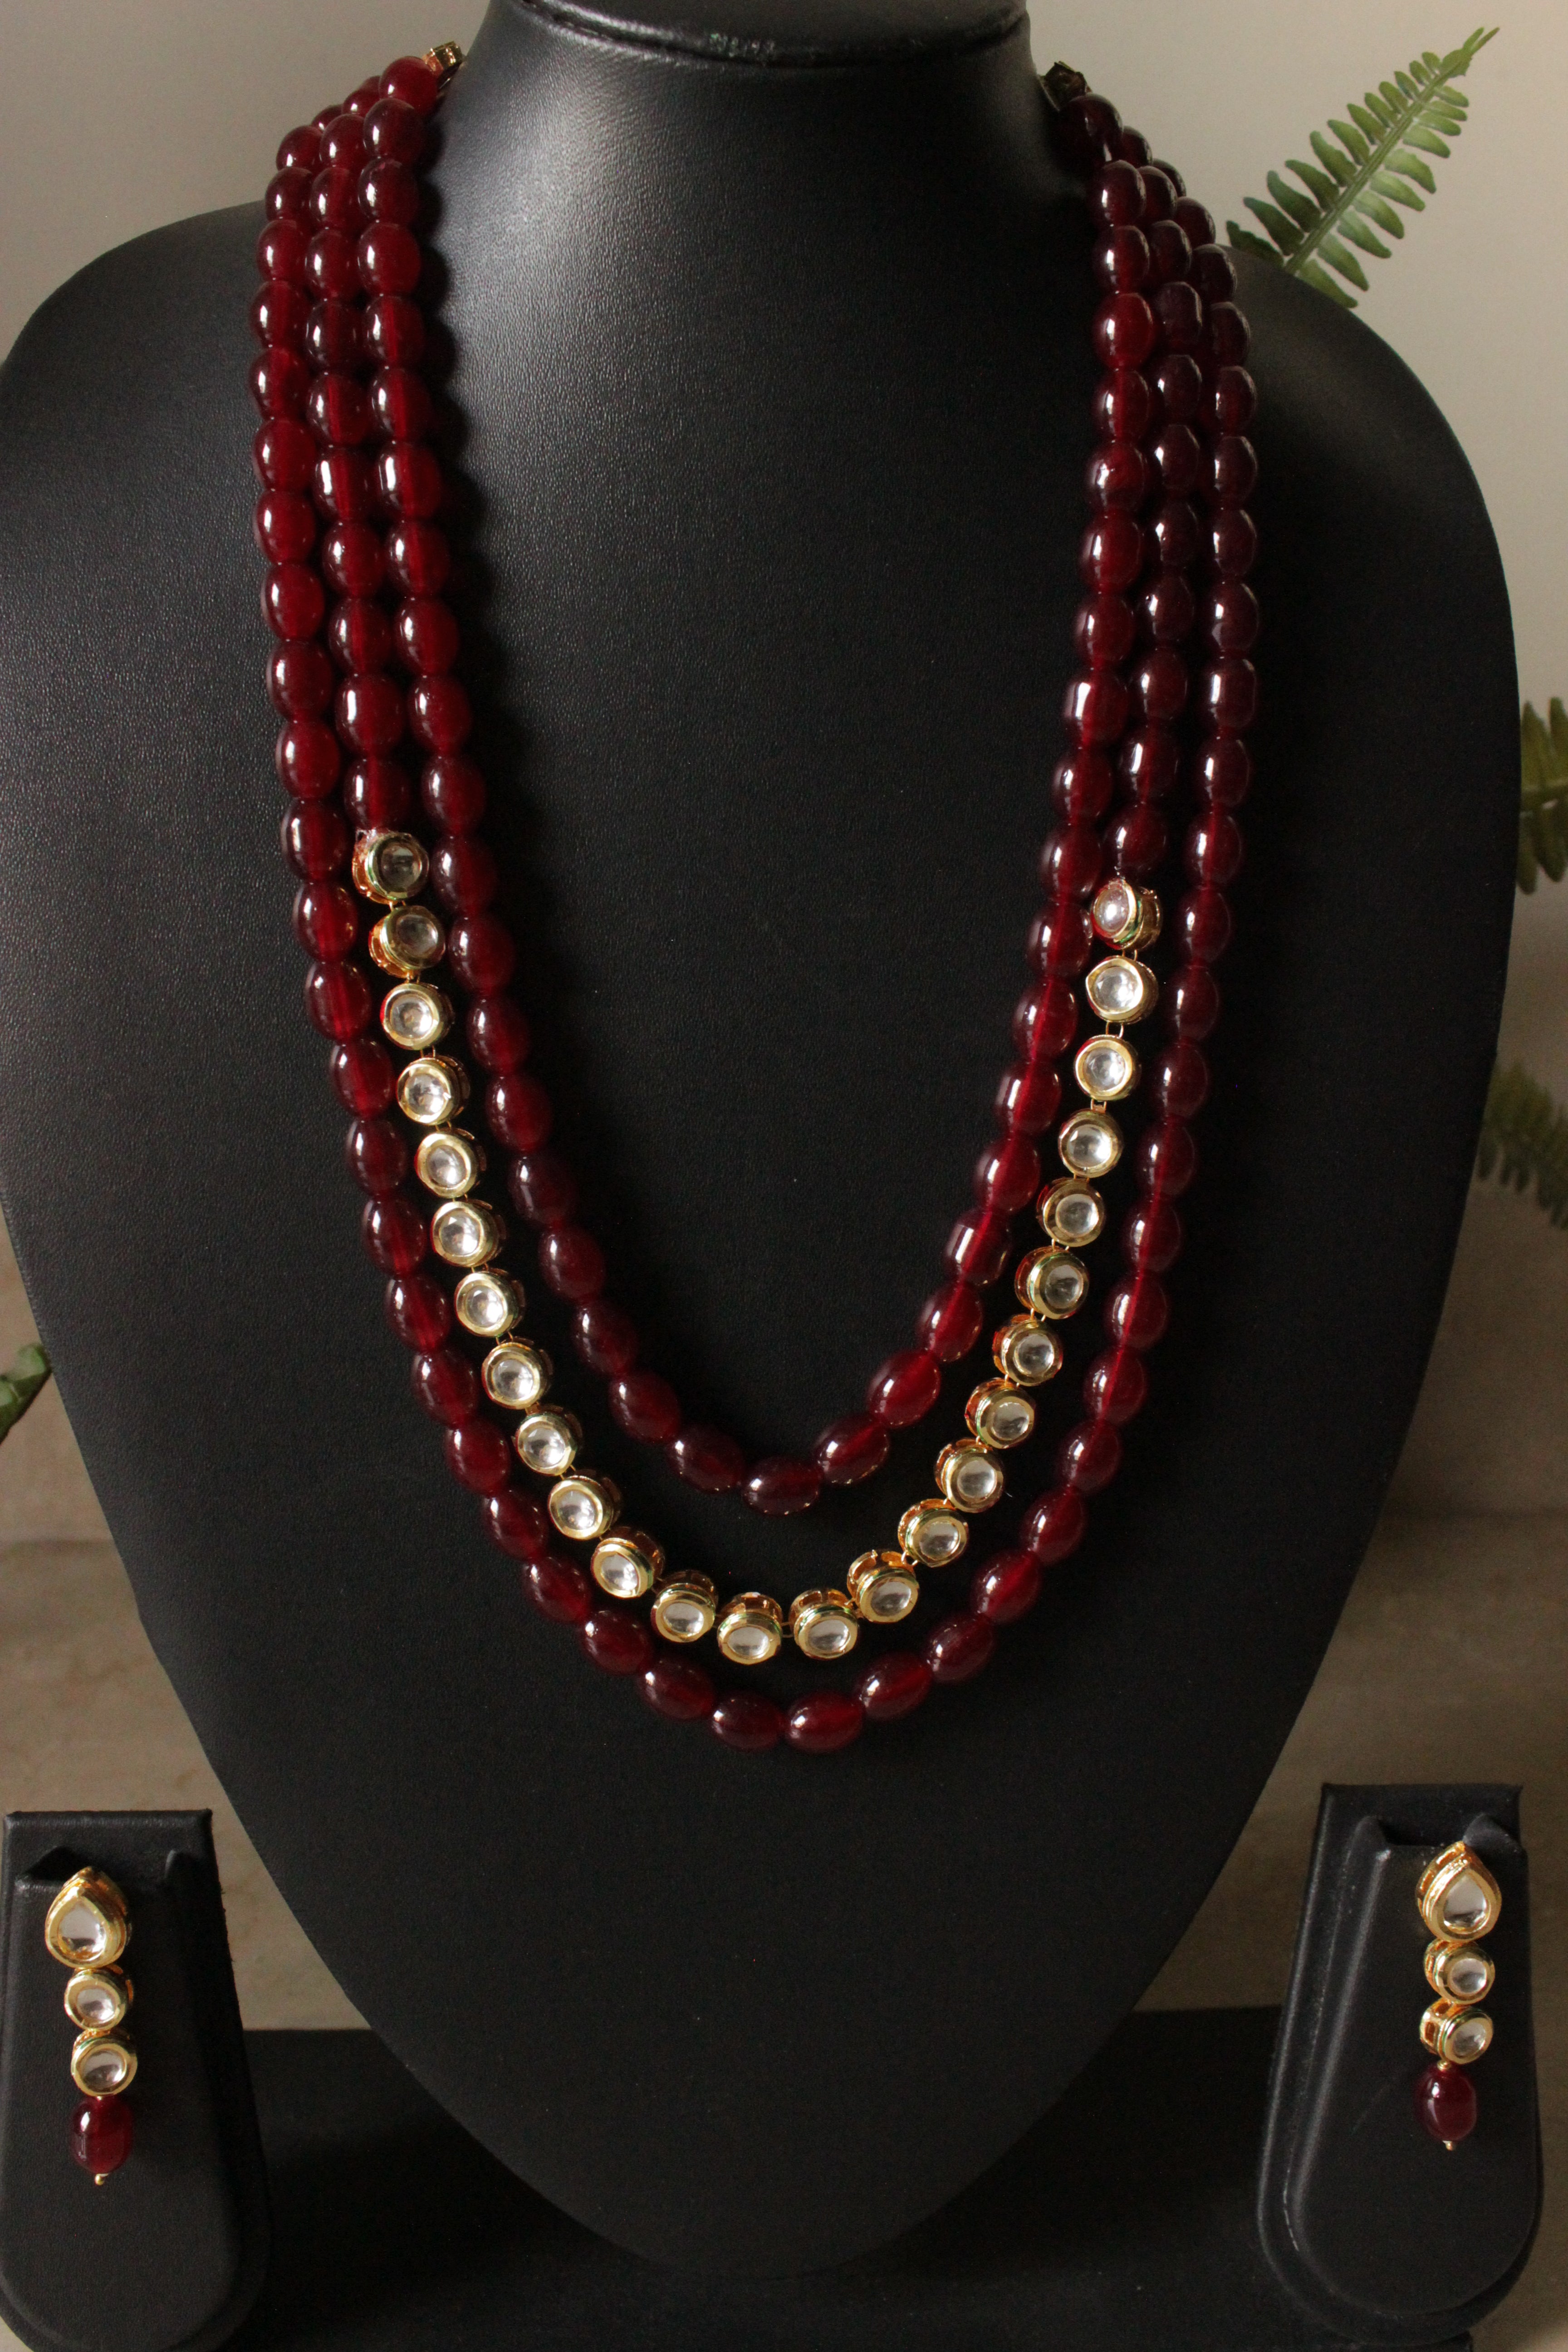 Maroon Glass Beads and Kundan Stones 3 Layer Adjustable Length Necklace Set